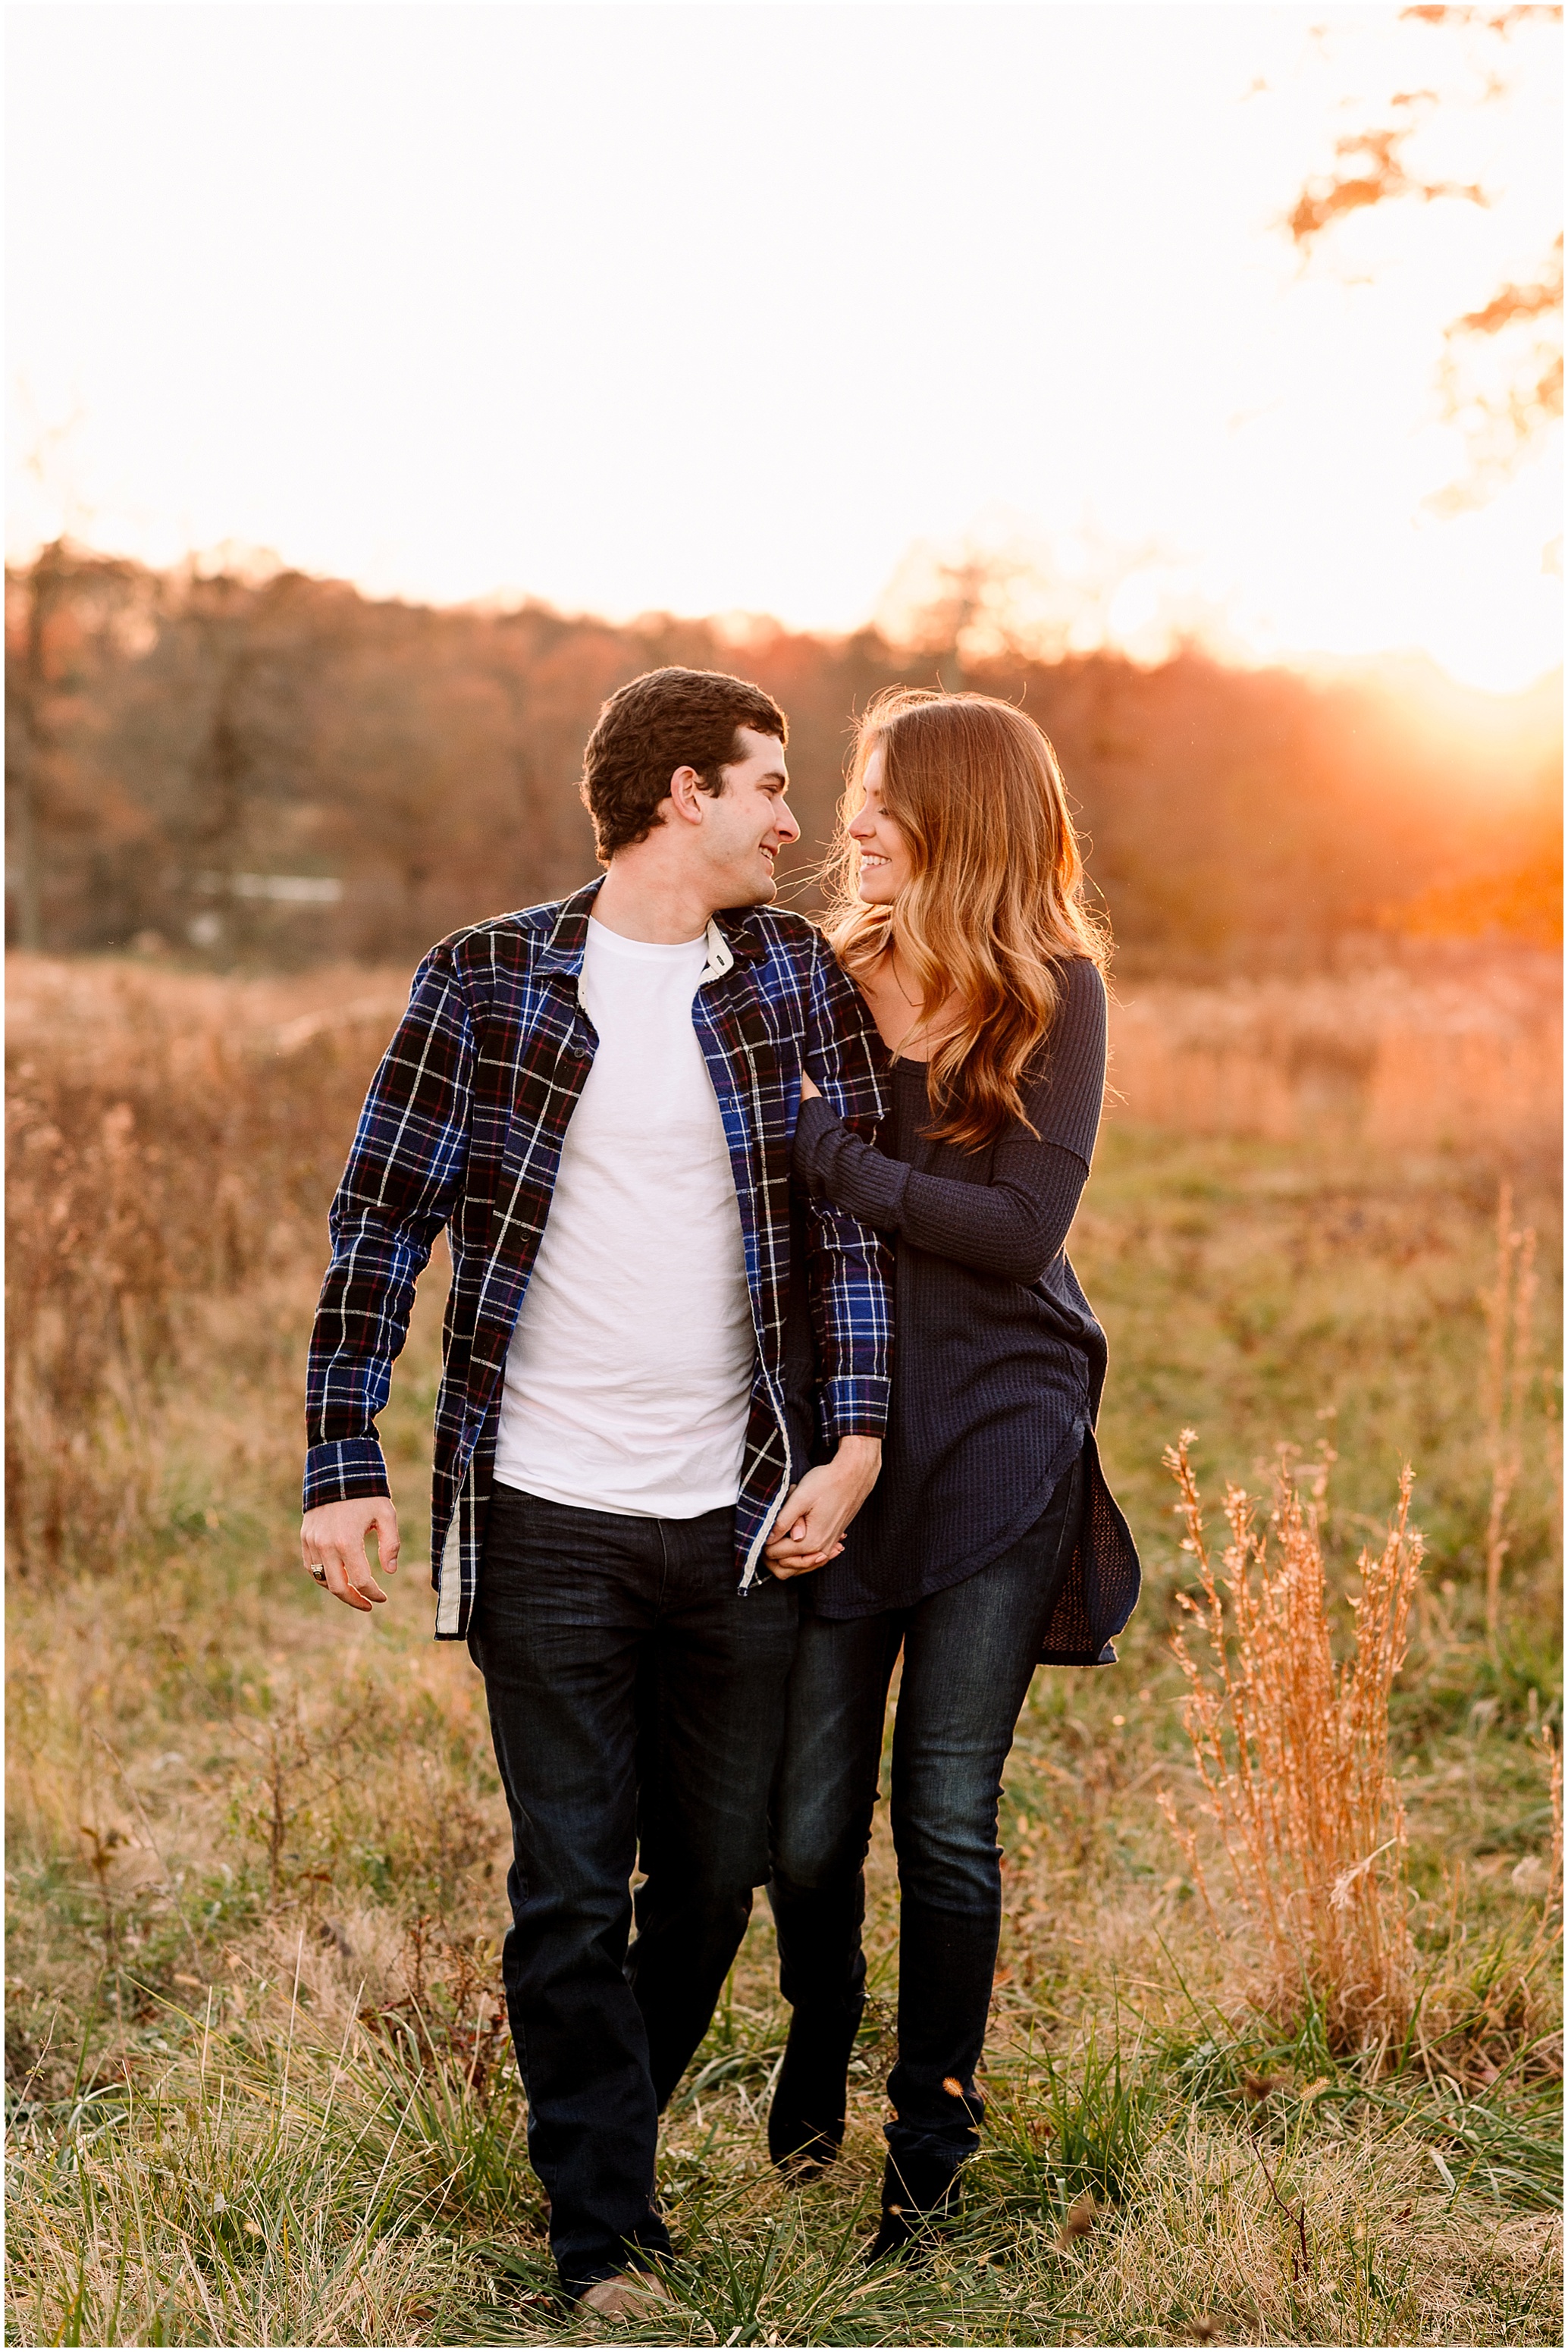 Hannah Leigh Photography Ellicott City MD Engagement Session_6945.jpg